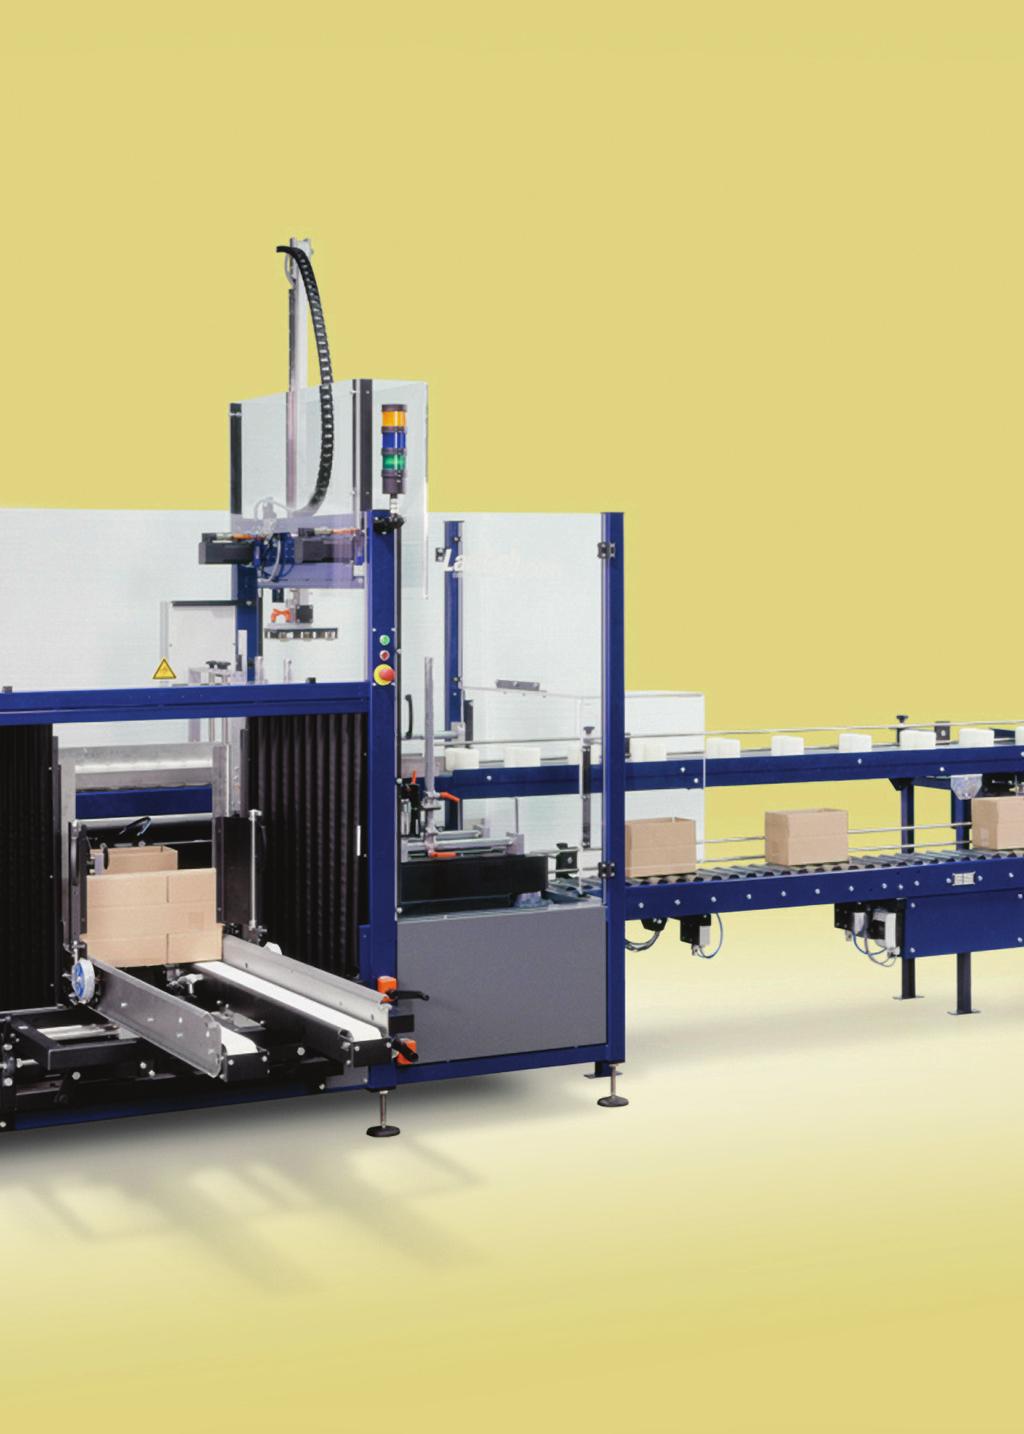 Modular Machine Design a Strategy for Companies of